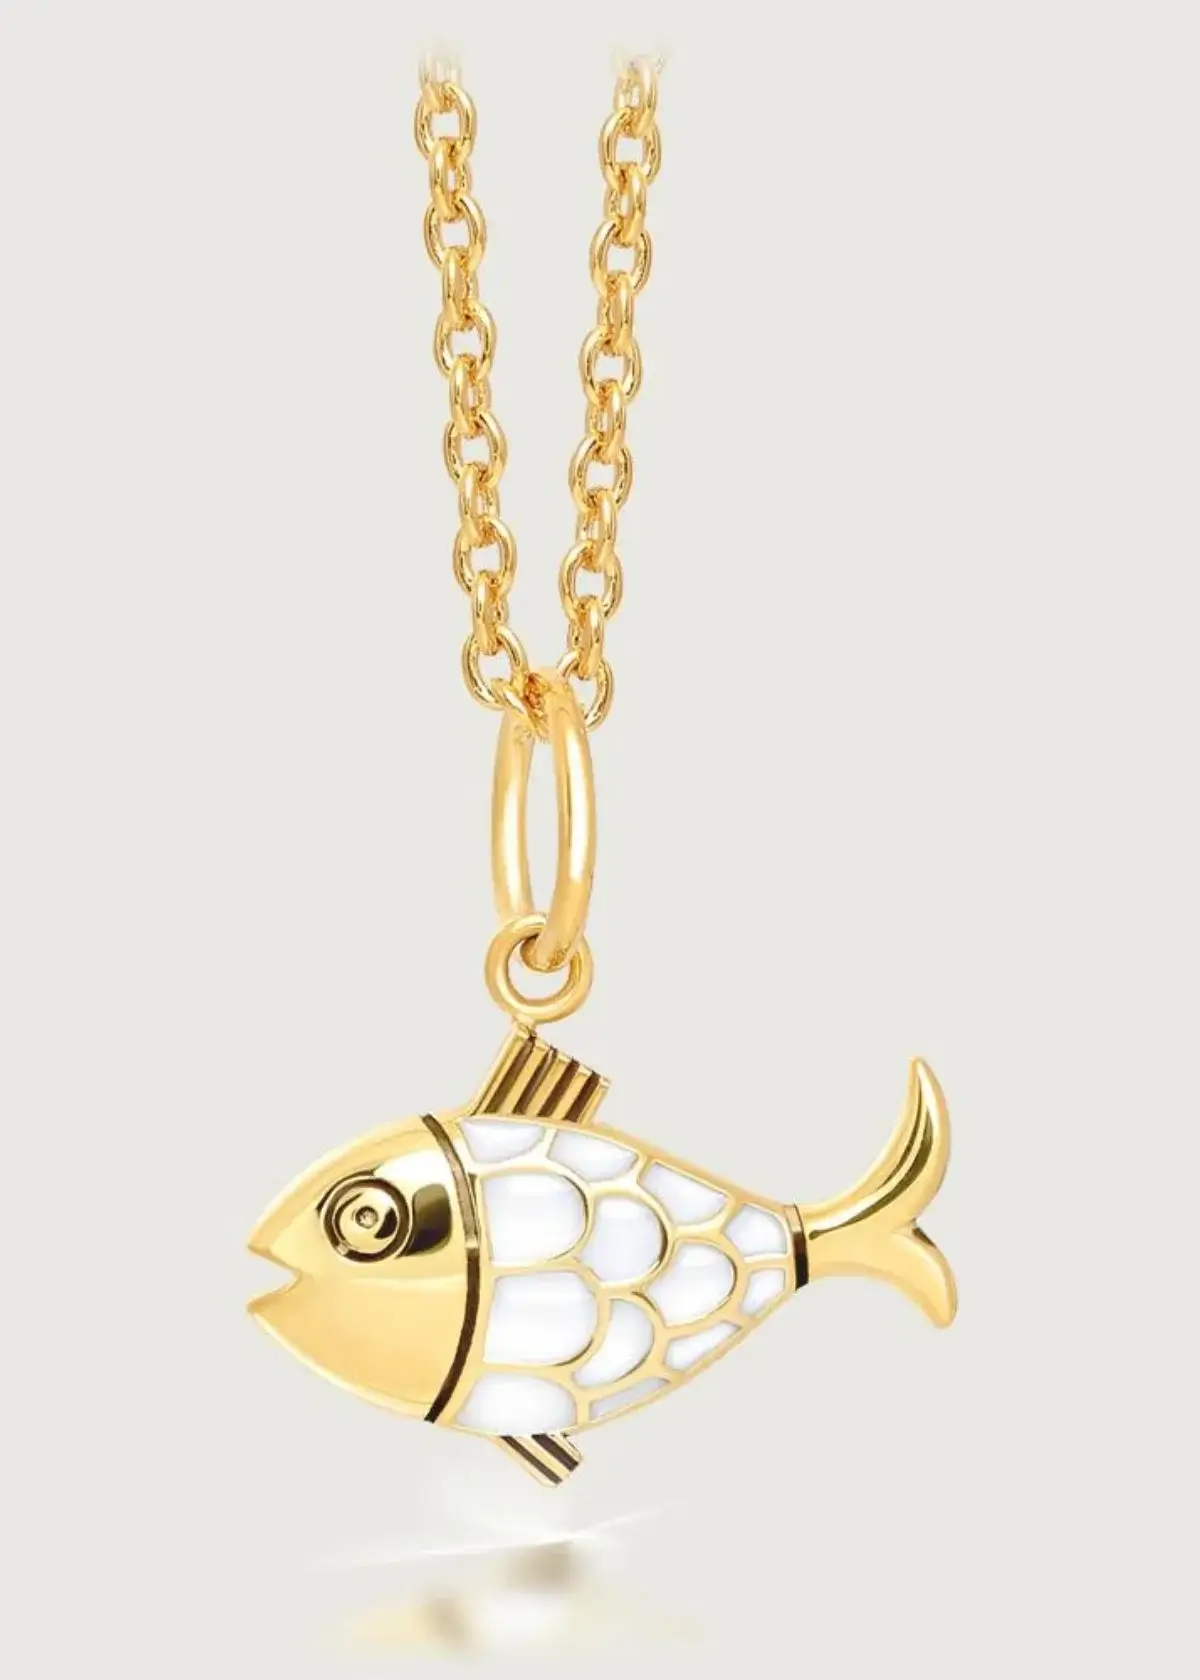 How to choose the right fish necklace?